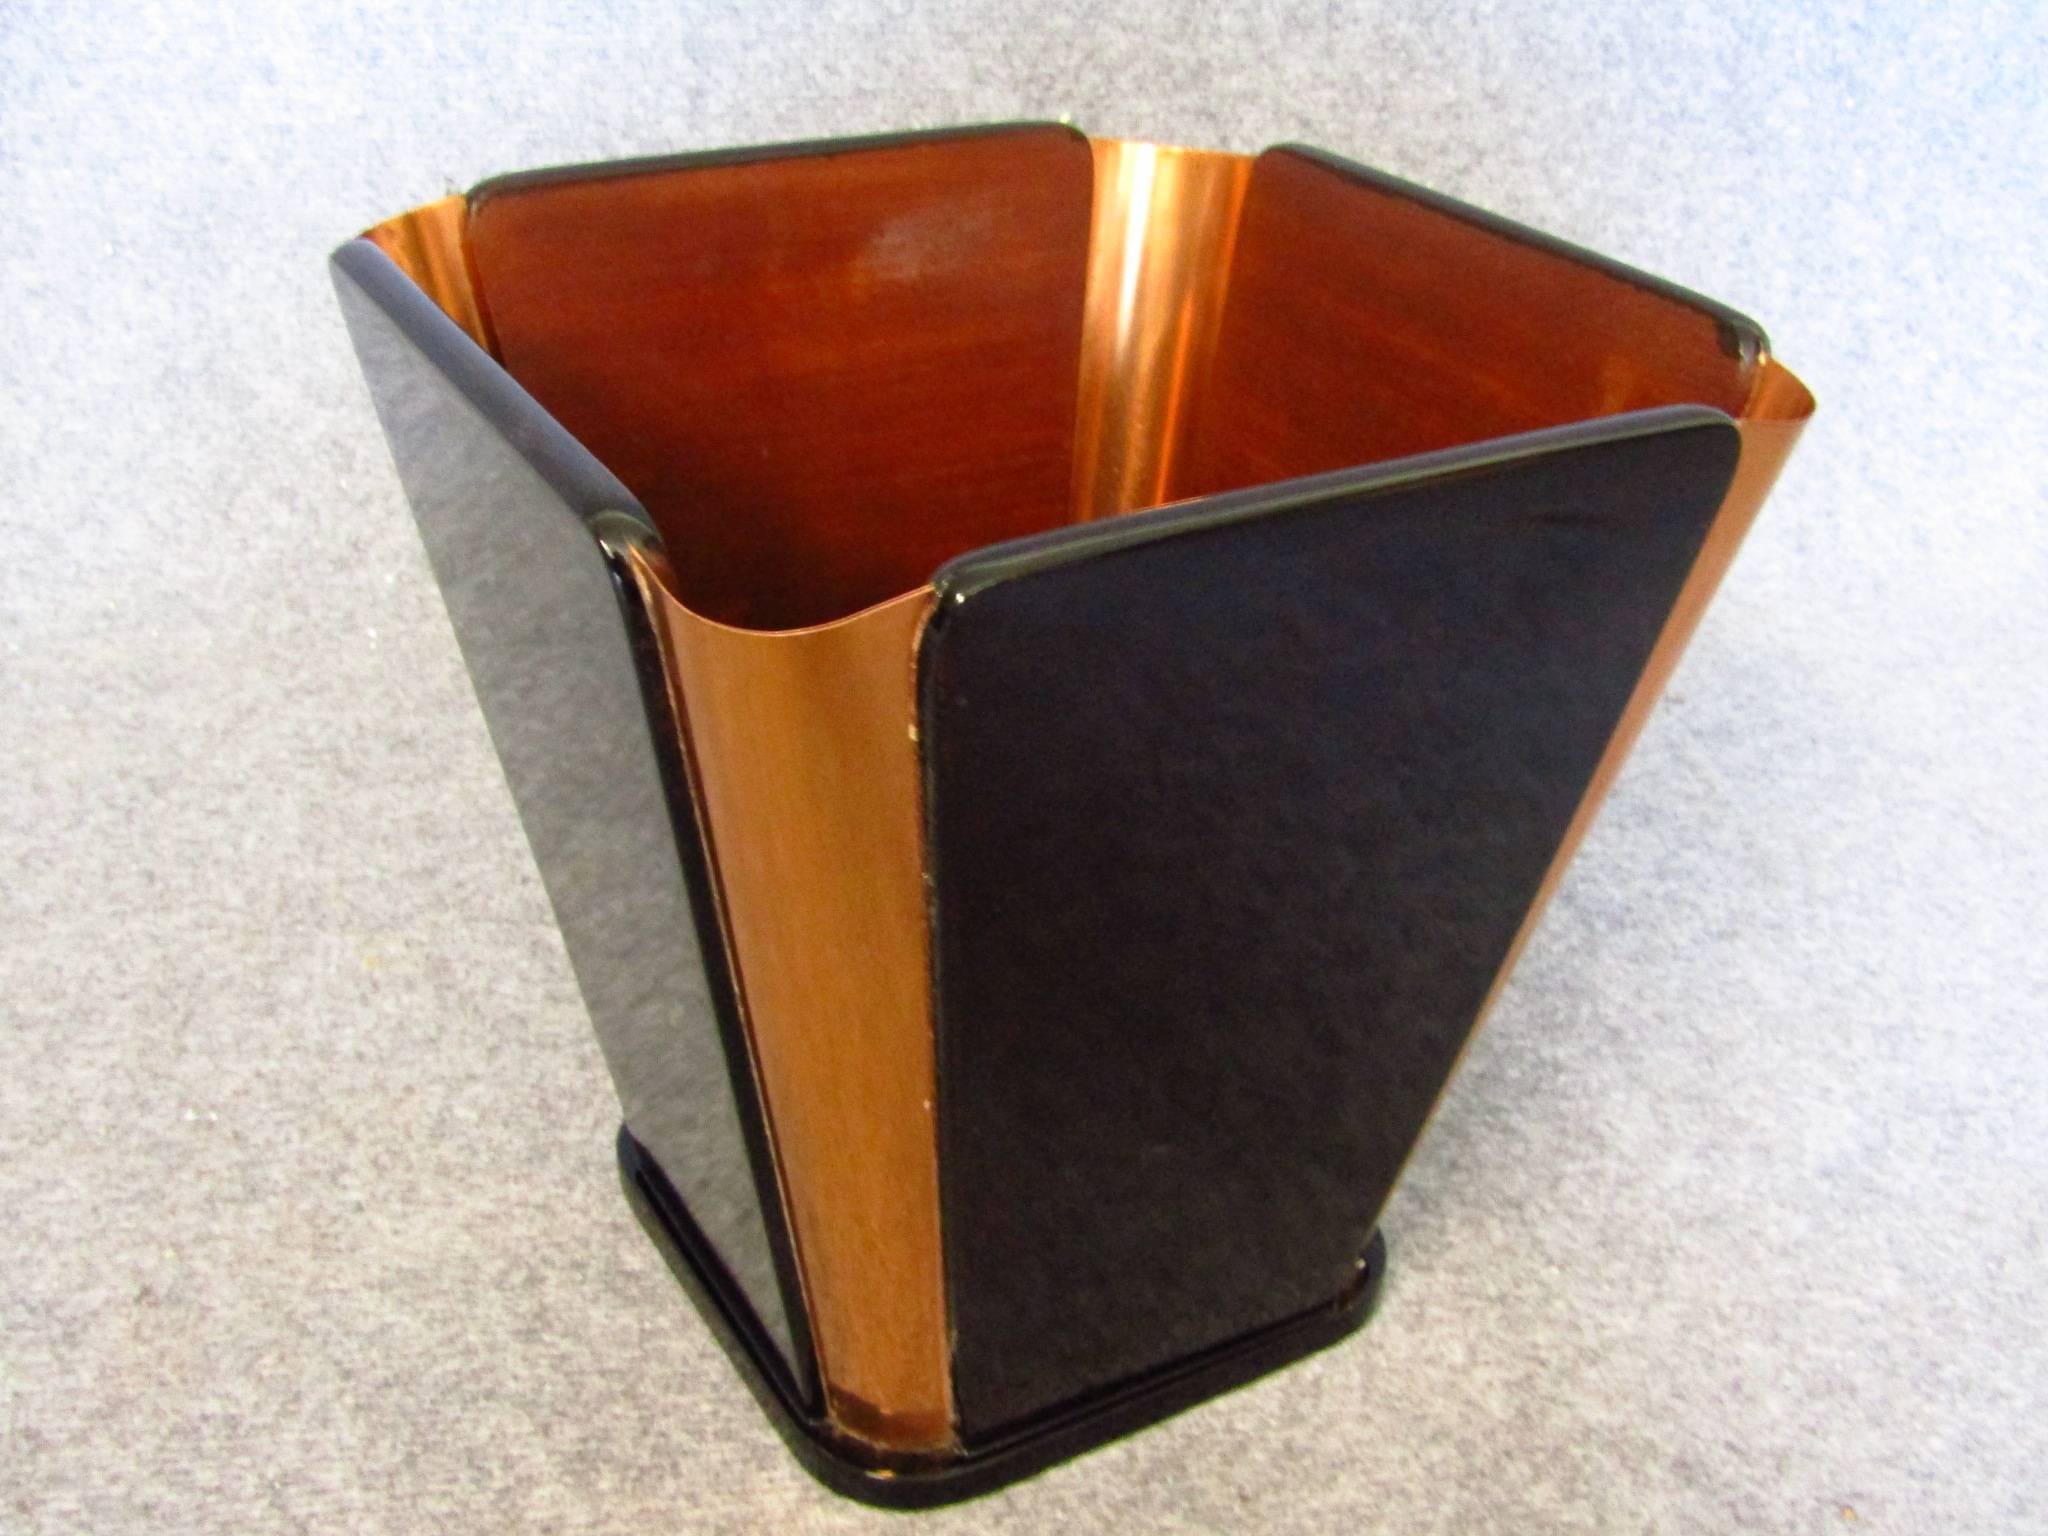 Émile-Jacques Ruhlmann Art Deco waste paper basket, 1930. Restored condition.
Literature: About the artist: Ruhlmann by Florence Camard.

Worldwide free shipping of this item!